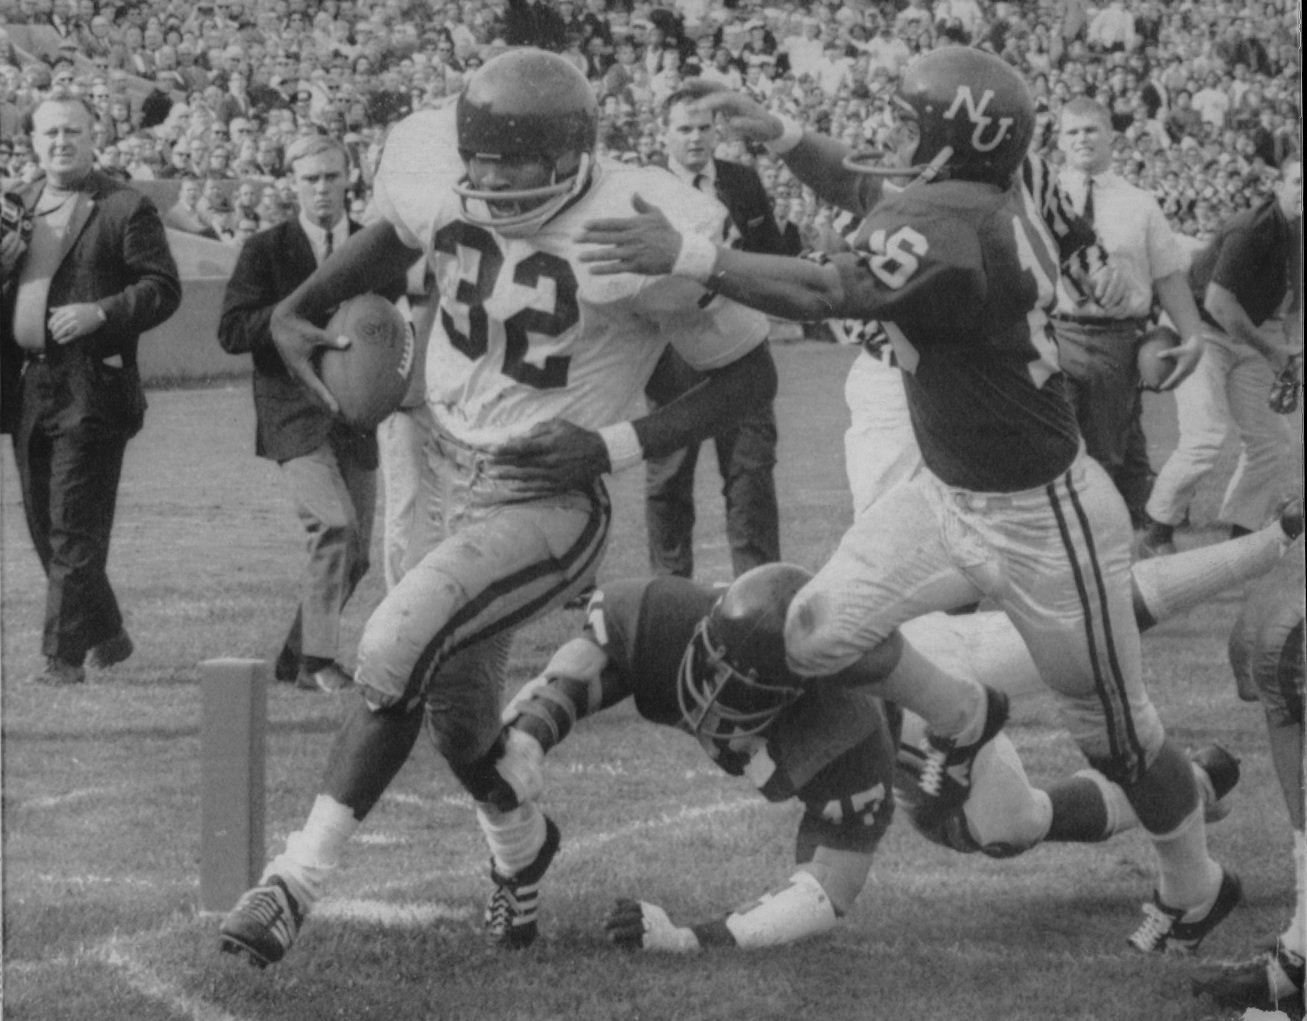 USC's O.J. Simpson (32) runs in a touchdown against Northwestern's Roland Collins (47) and Dennis White (16) on Sept. 28, 1968, at Dyche Stadium in Evanston.